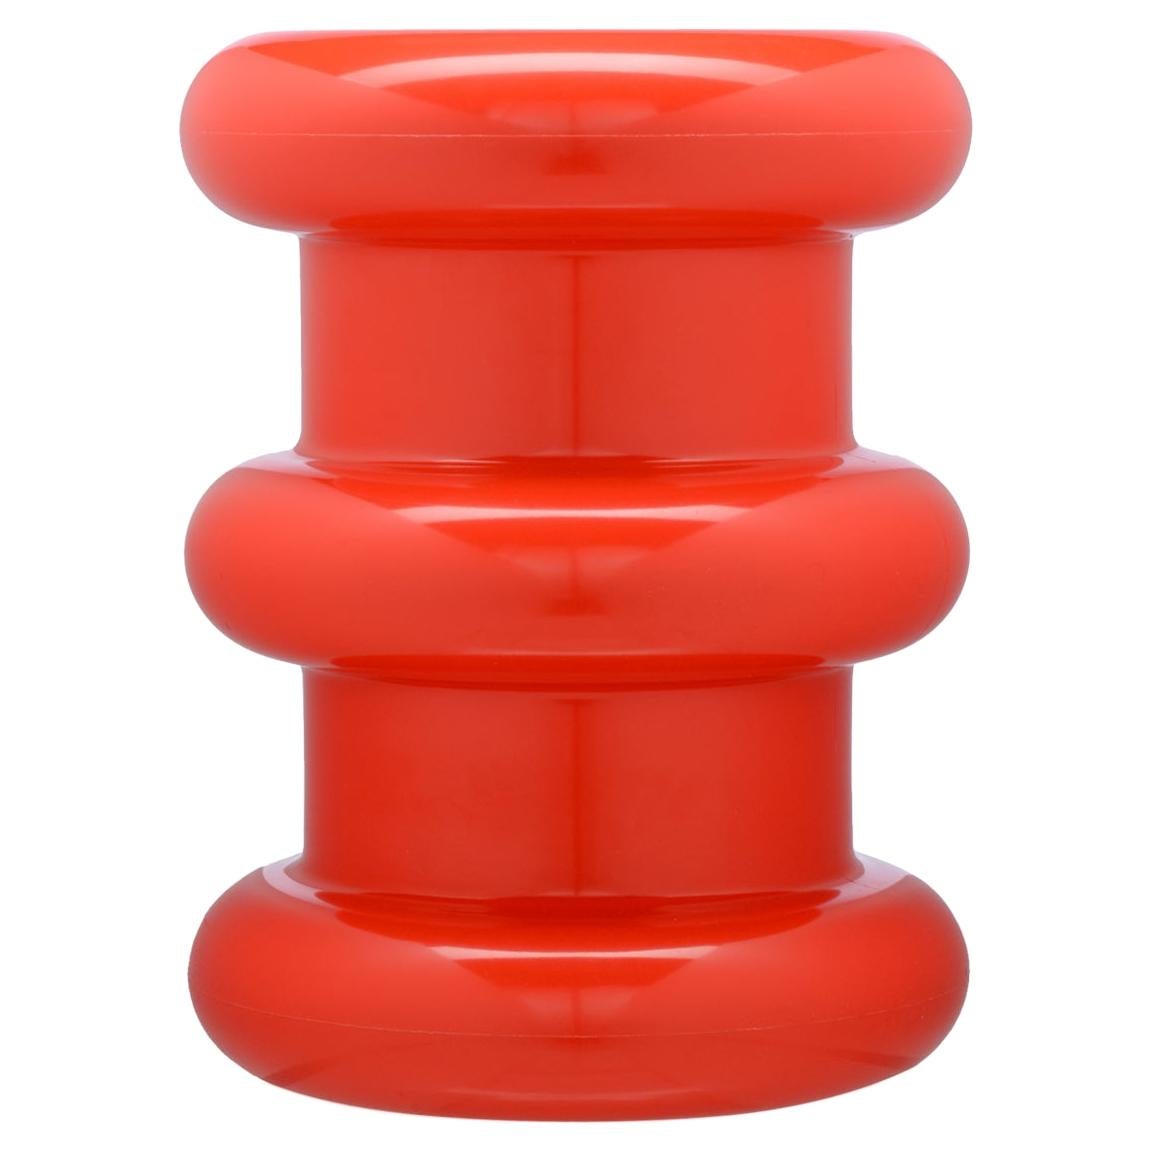 Kartell Pilastro Stool in Red by Ettore Sottsass